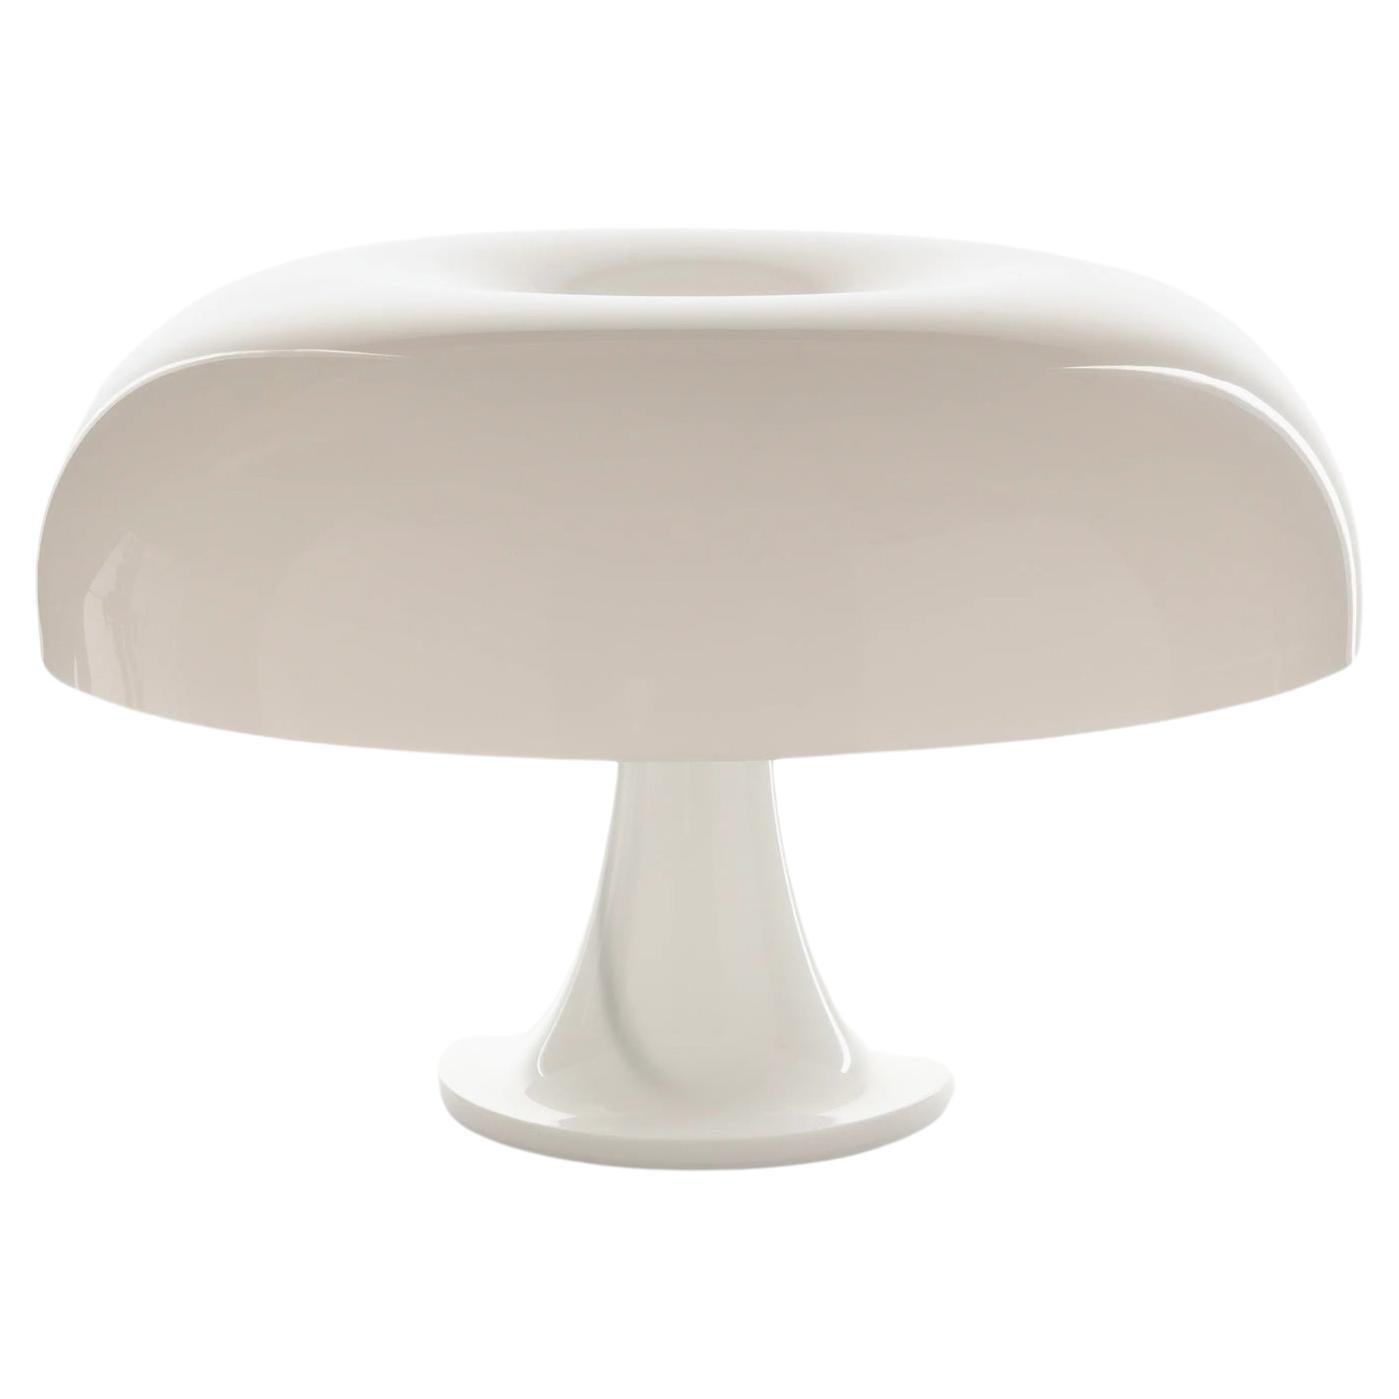 Nessino Table Lamp by Giancarlo Mattioli for Artemide For Sale